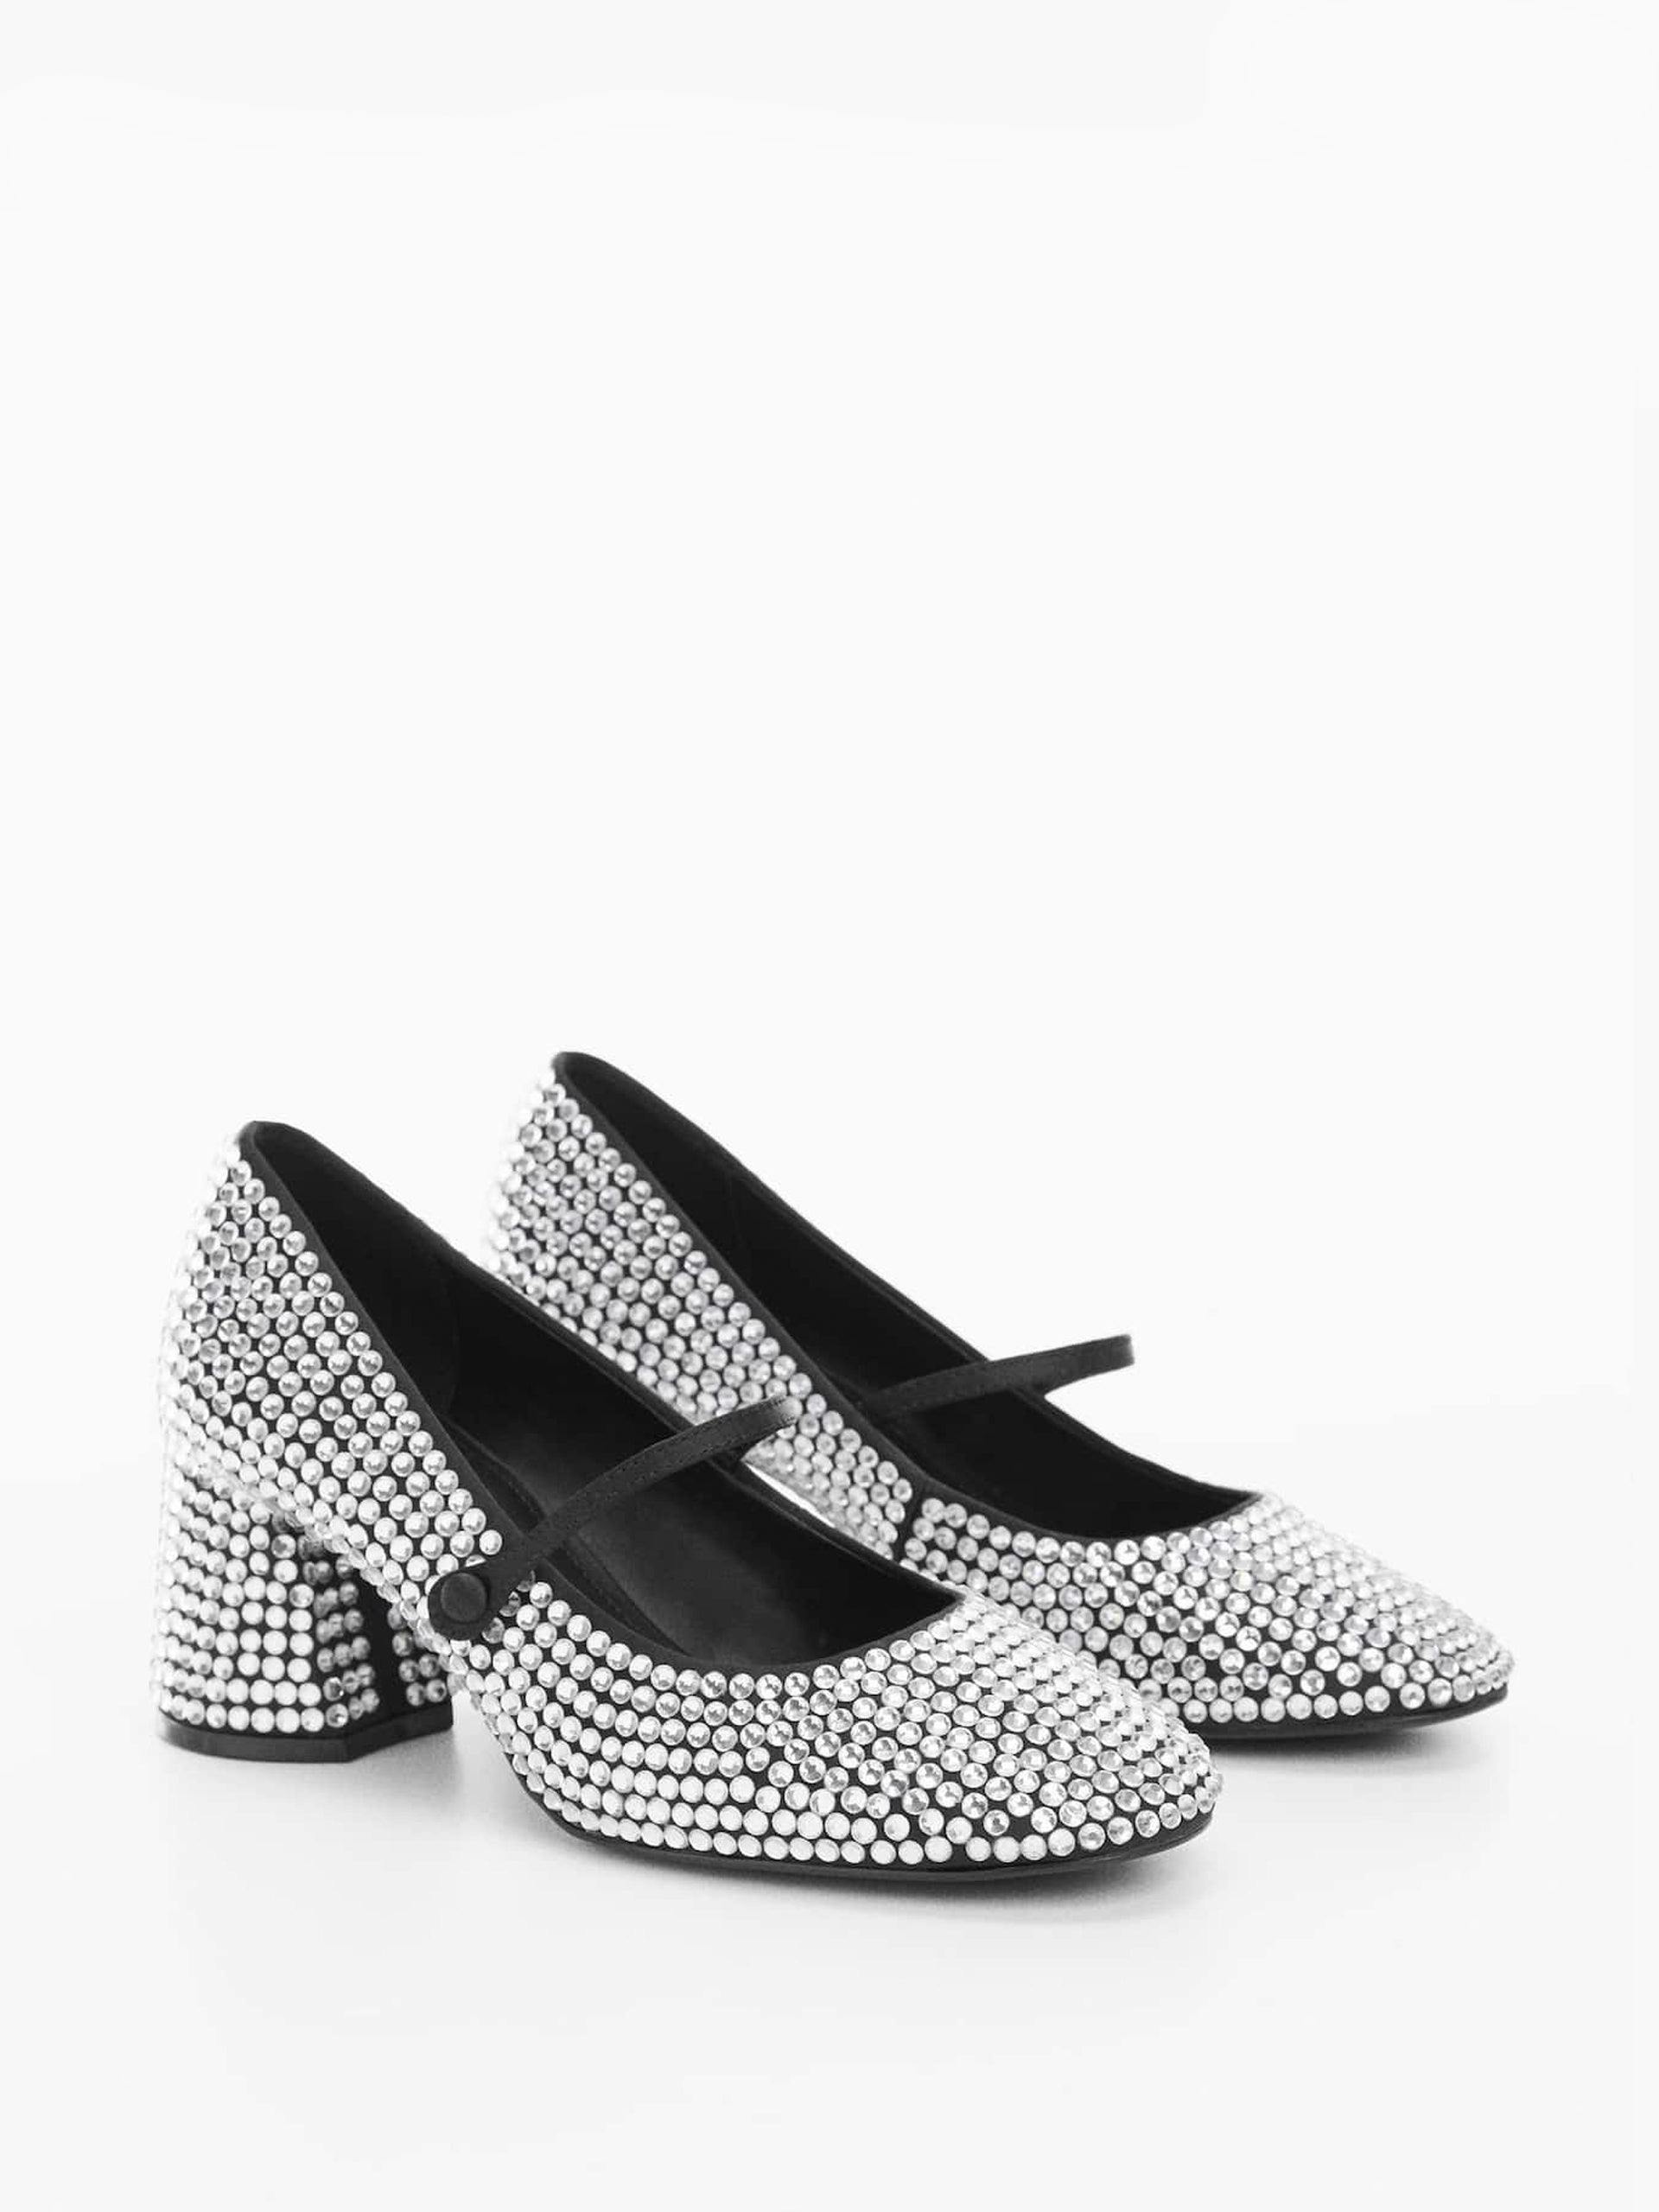 Block heeled silver shoes